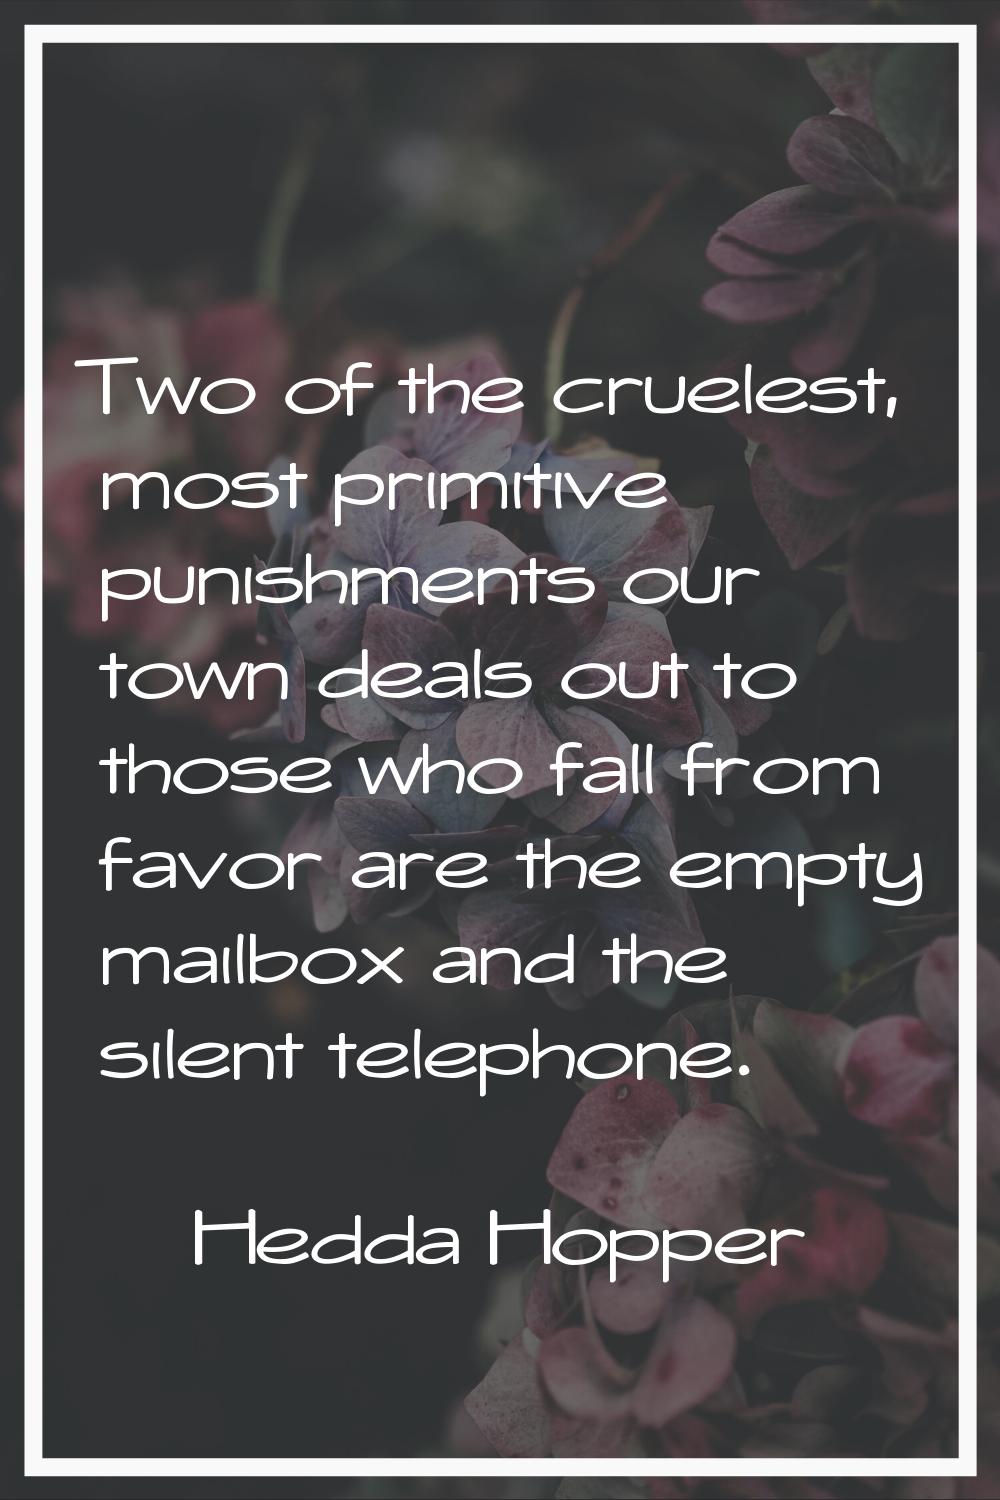 Two of the cruelest, most primitive punishments our town deals out to those who fall from favor are